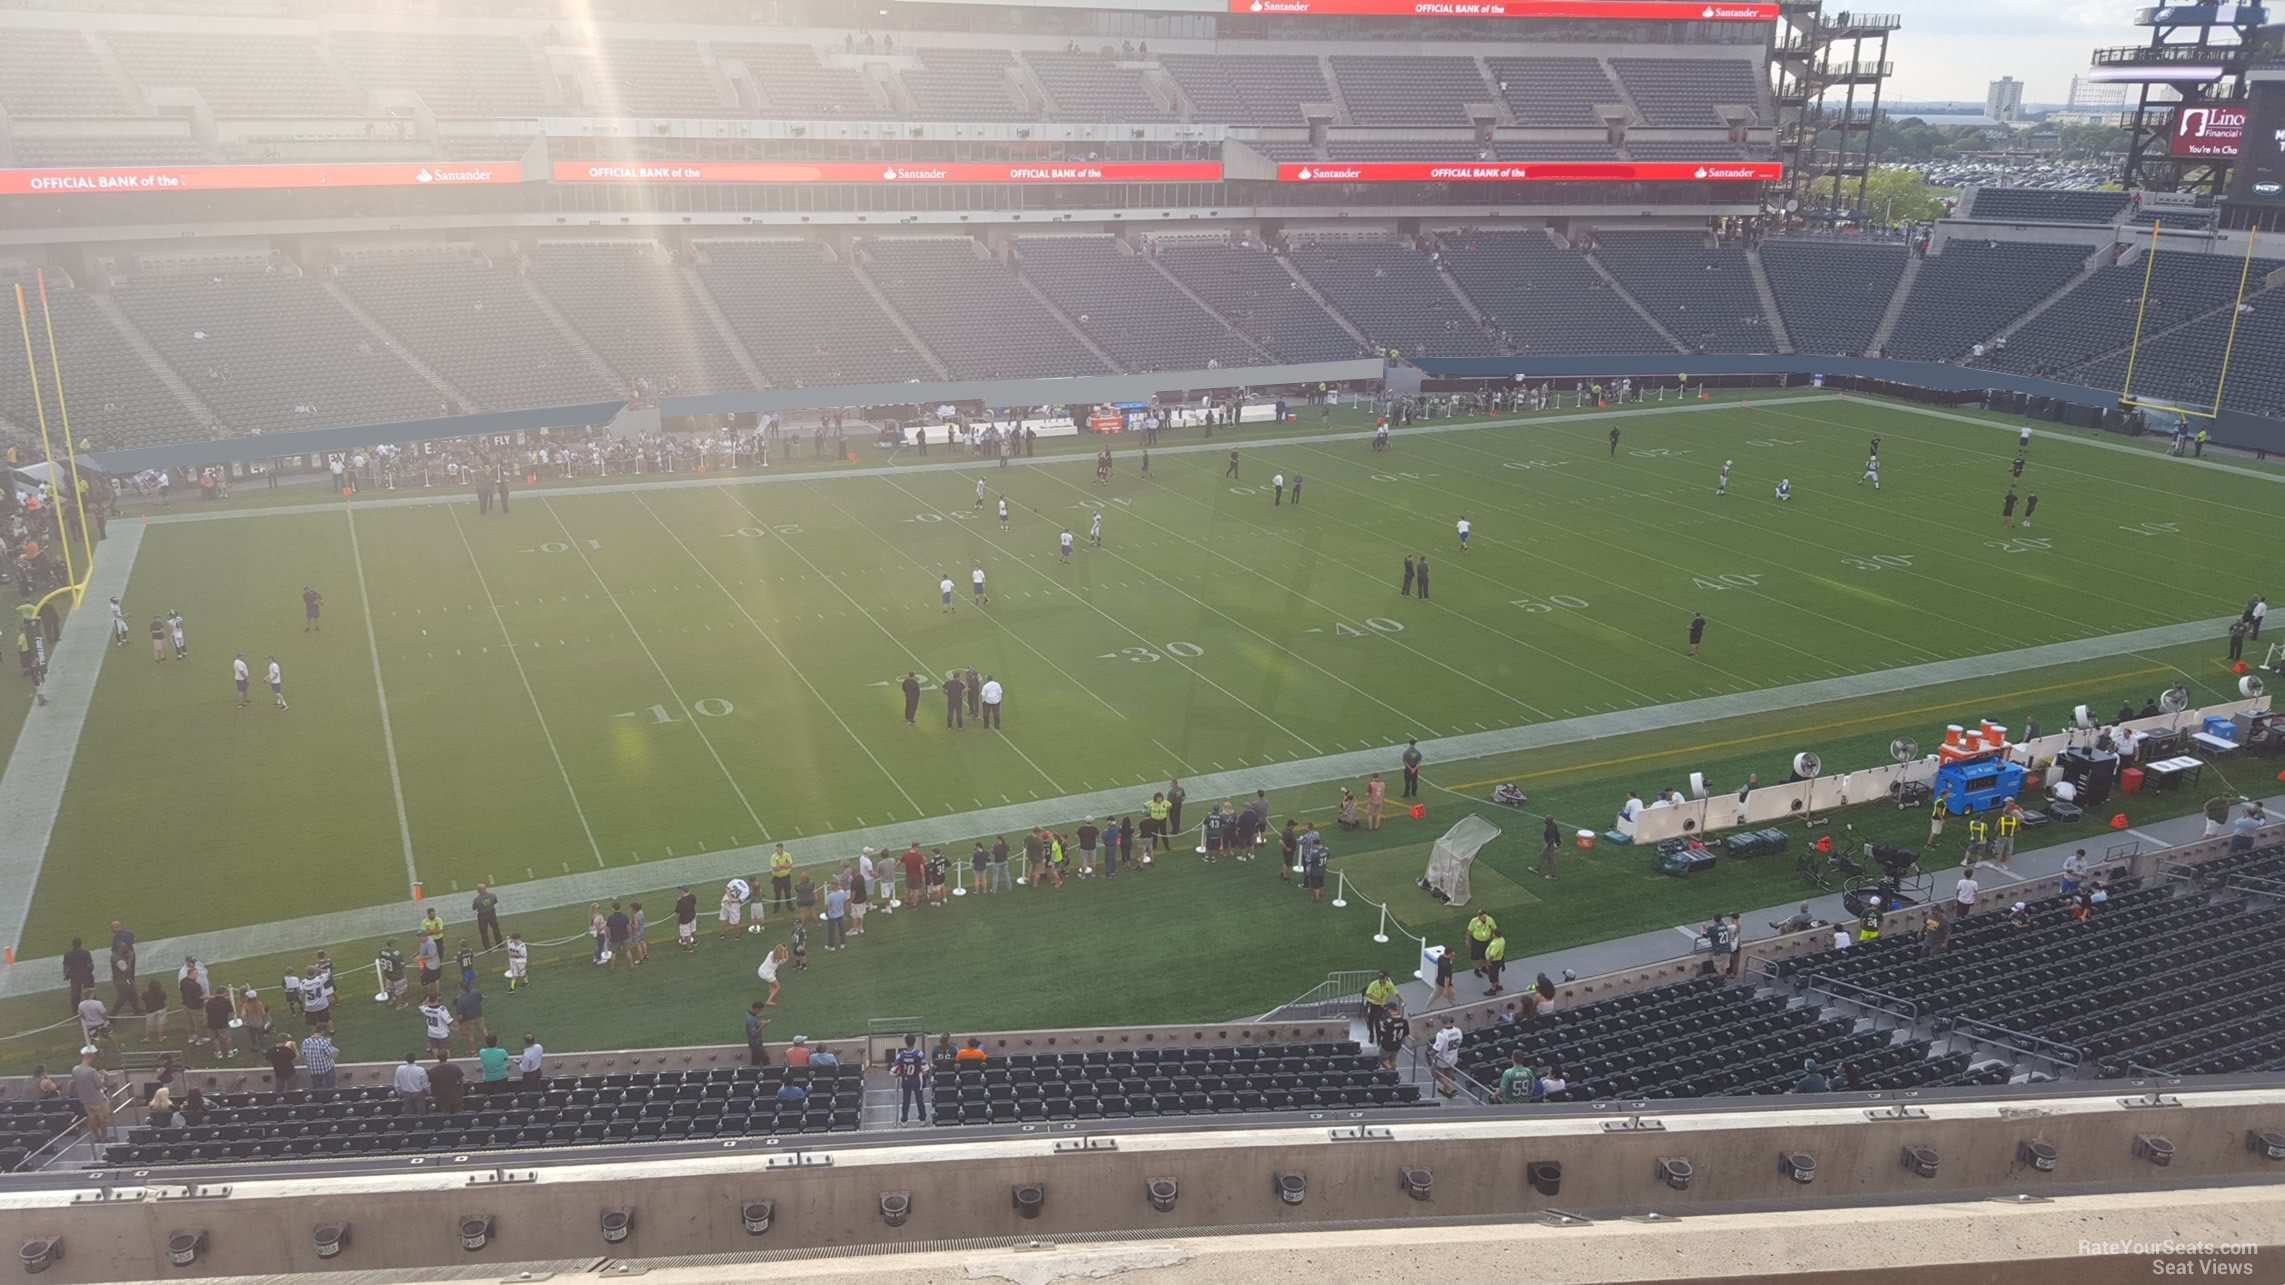 section c18, row 7 seat view  for football - lincoln financial field